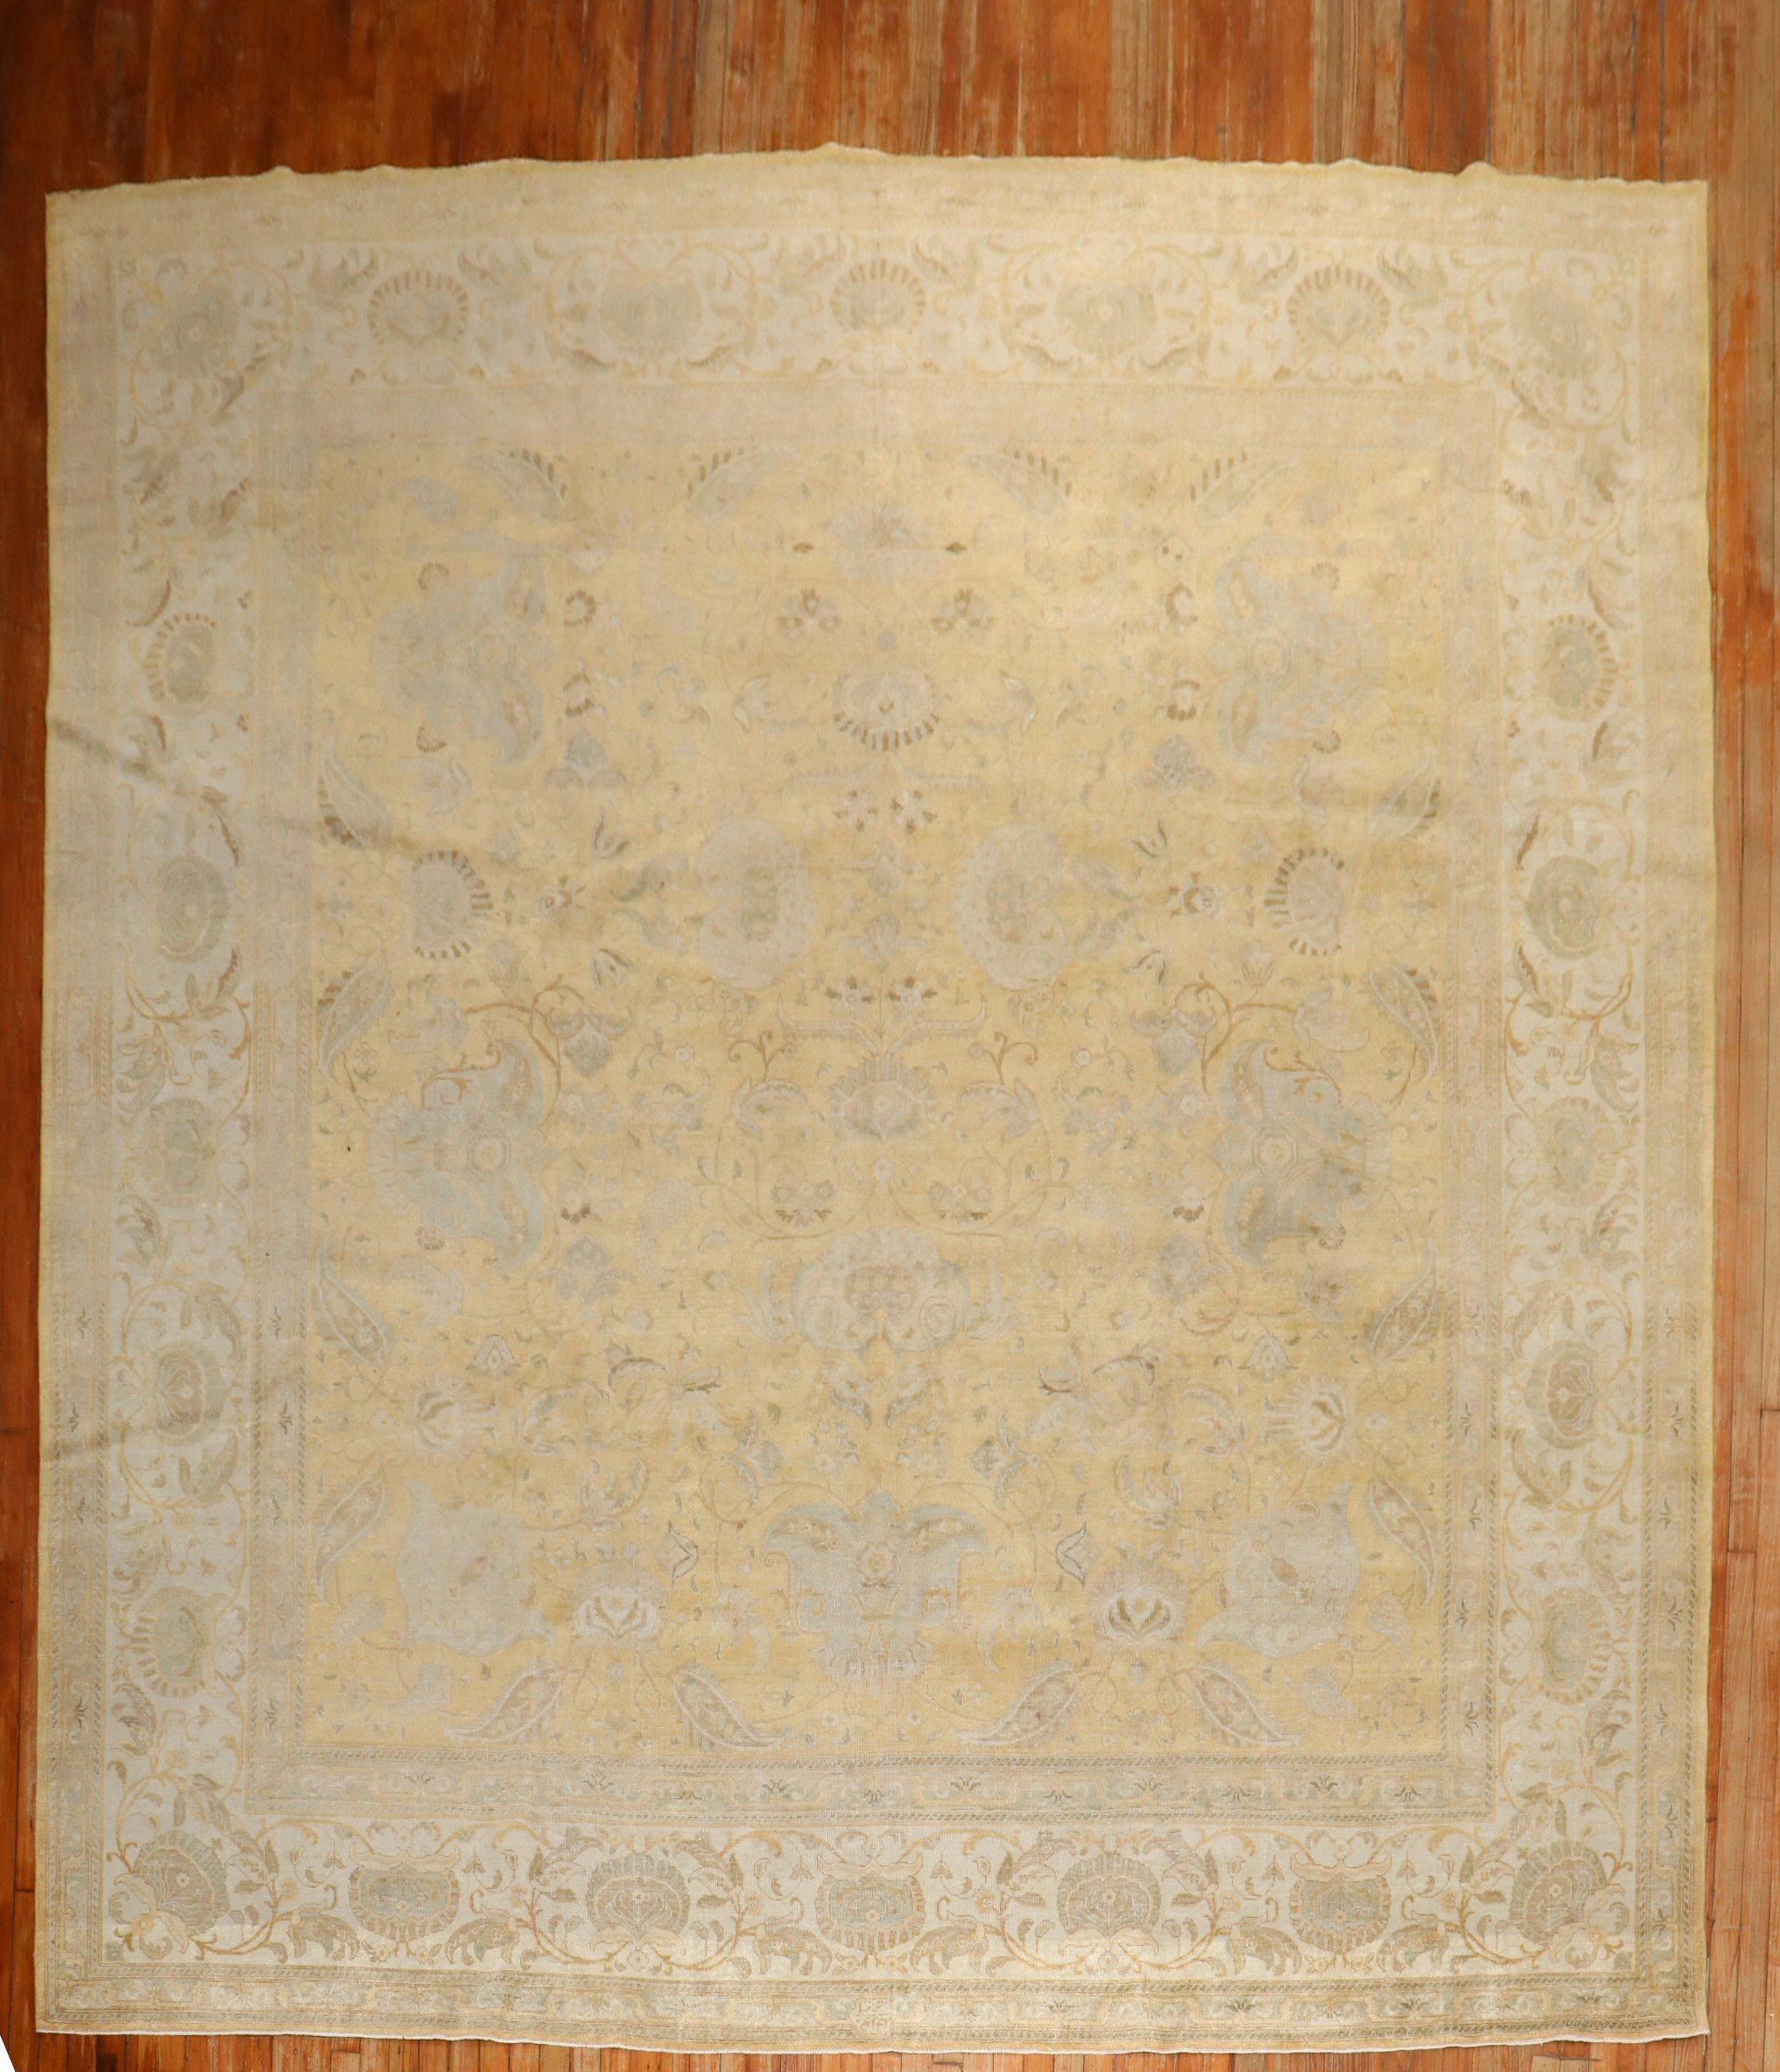 An early 20th-century antique Persian Tabriz room-size square rug in gold and ivory tones

Measure: 10'8'' x 12'5''

Tabriz rug weavers drew on a varied repertoire of delicate designs: multi-faceted flowerheads, subtle arabesques, lush vinery